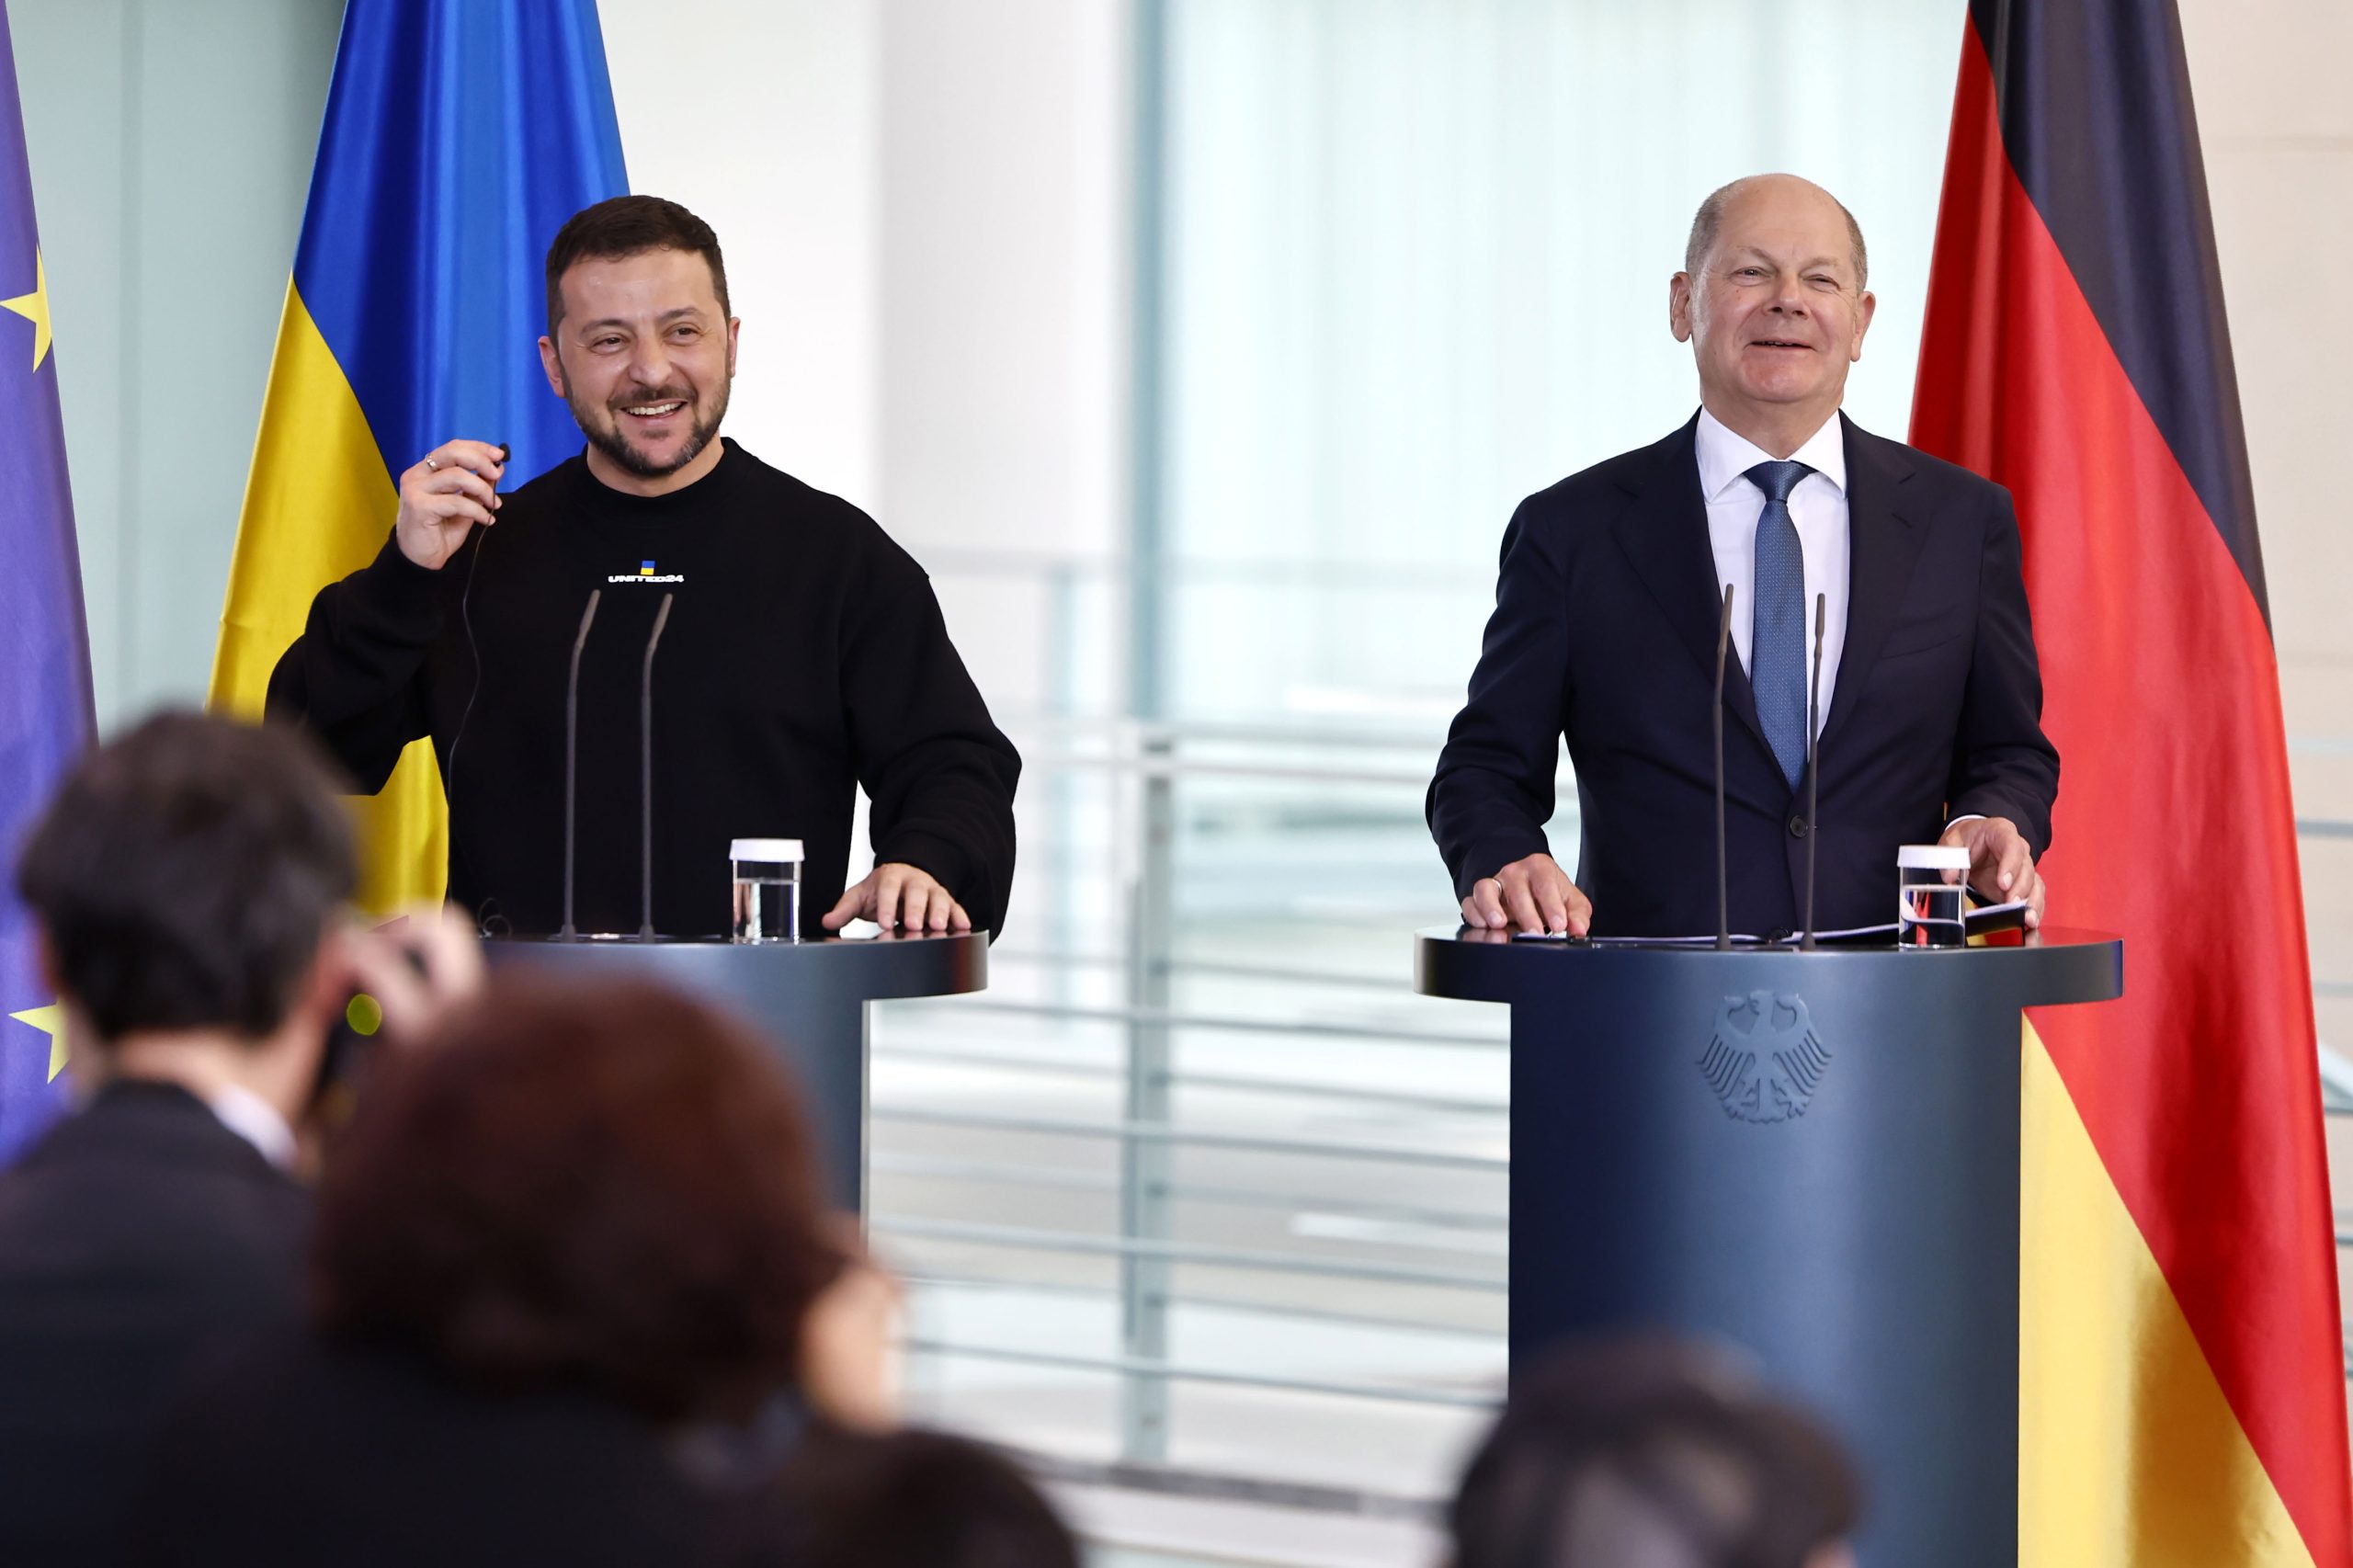 epa10626893 Ukrainian President Volodymyr Zelensky (L) and German Chancellor Olaf Scholz (R) share a laugh during a joint press conference following their meeting at the Chancellery in Berlin, Germany, 14 May 2023. It is the first time Zelensky visits Germany since the start of the Russian invasion of Ukraine in February 2022.  EPA/HANNIBAL HANSCHKE